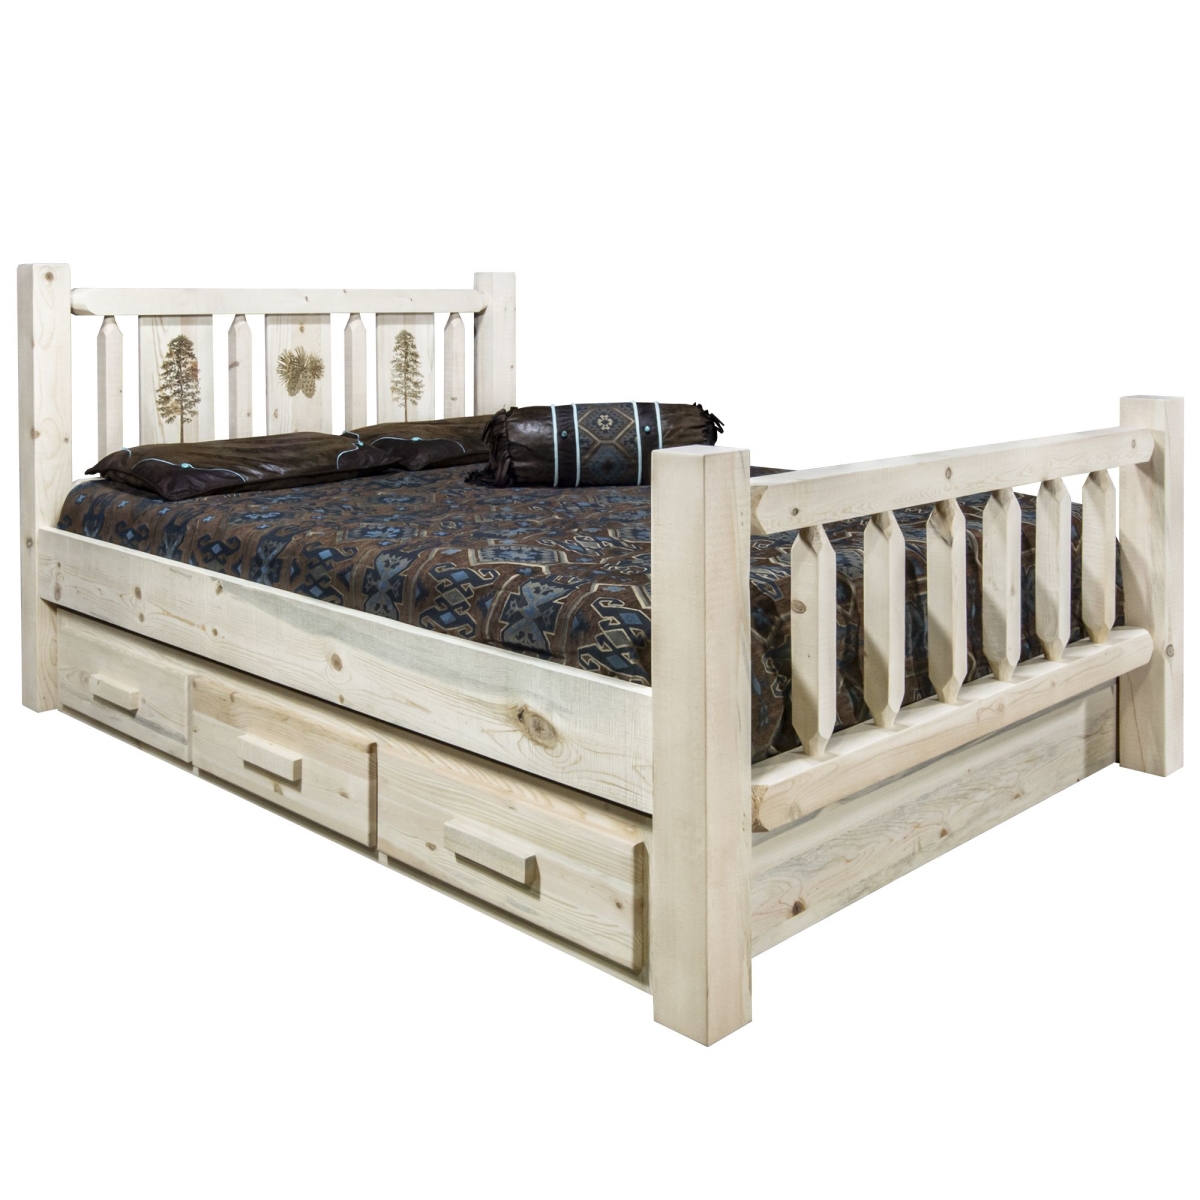 Homestead Collection Twin Size Storage Bed with Laser Engraved Pine Design, Clear Lacquer Finish -  D2D Technologies, D23076900